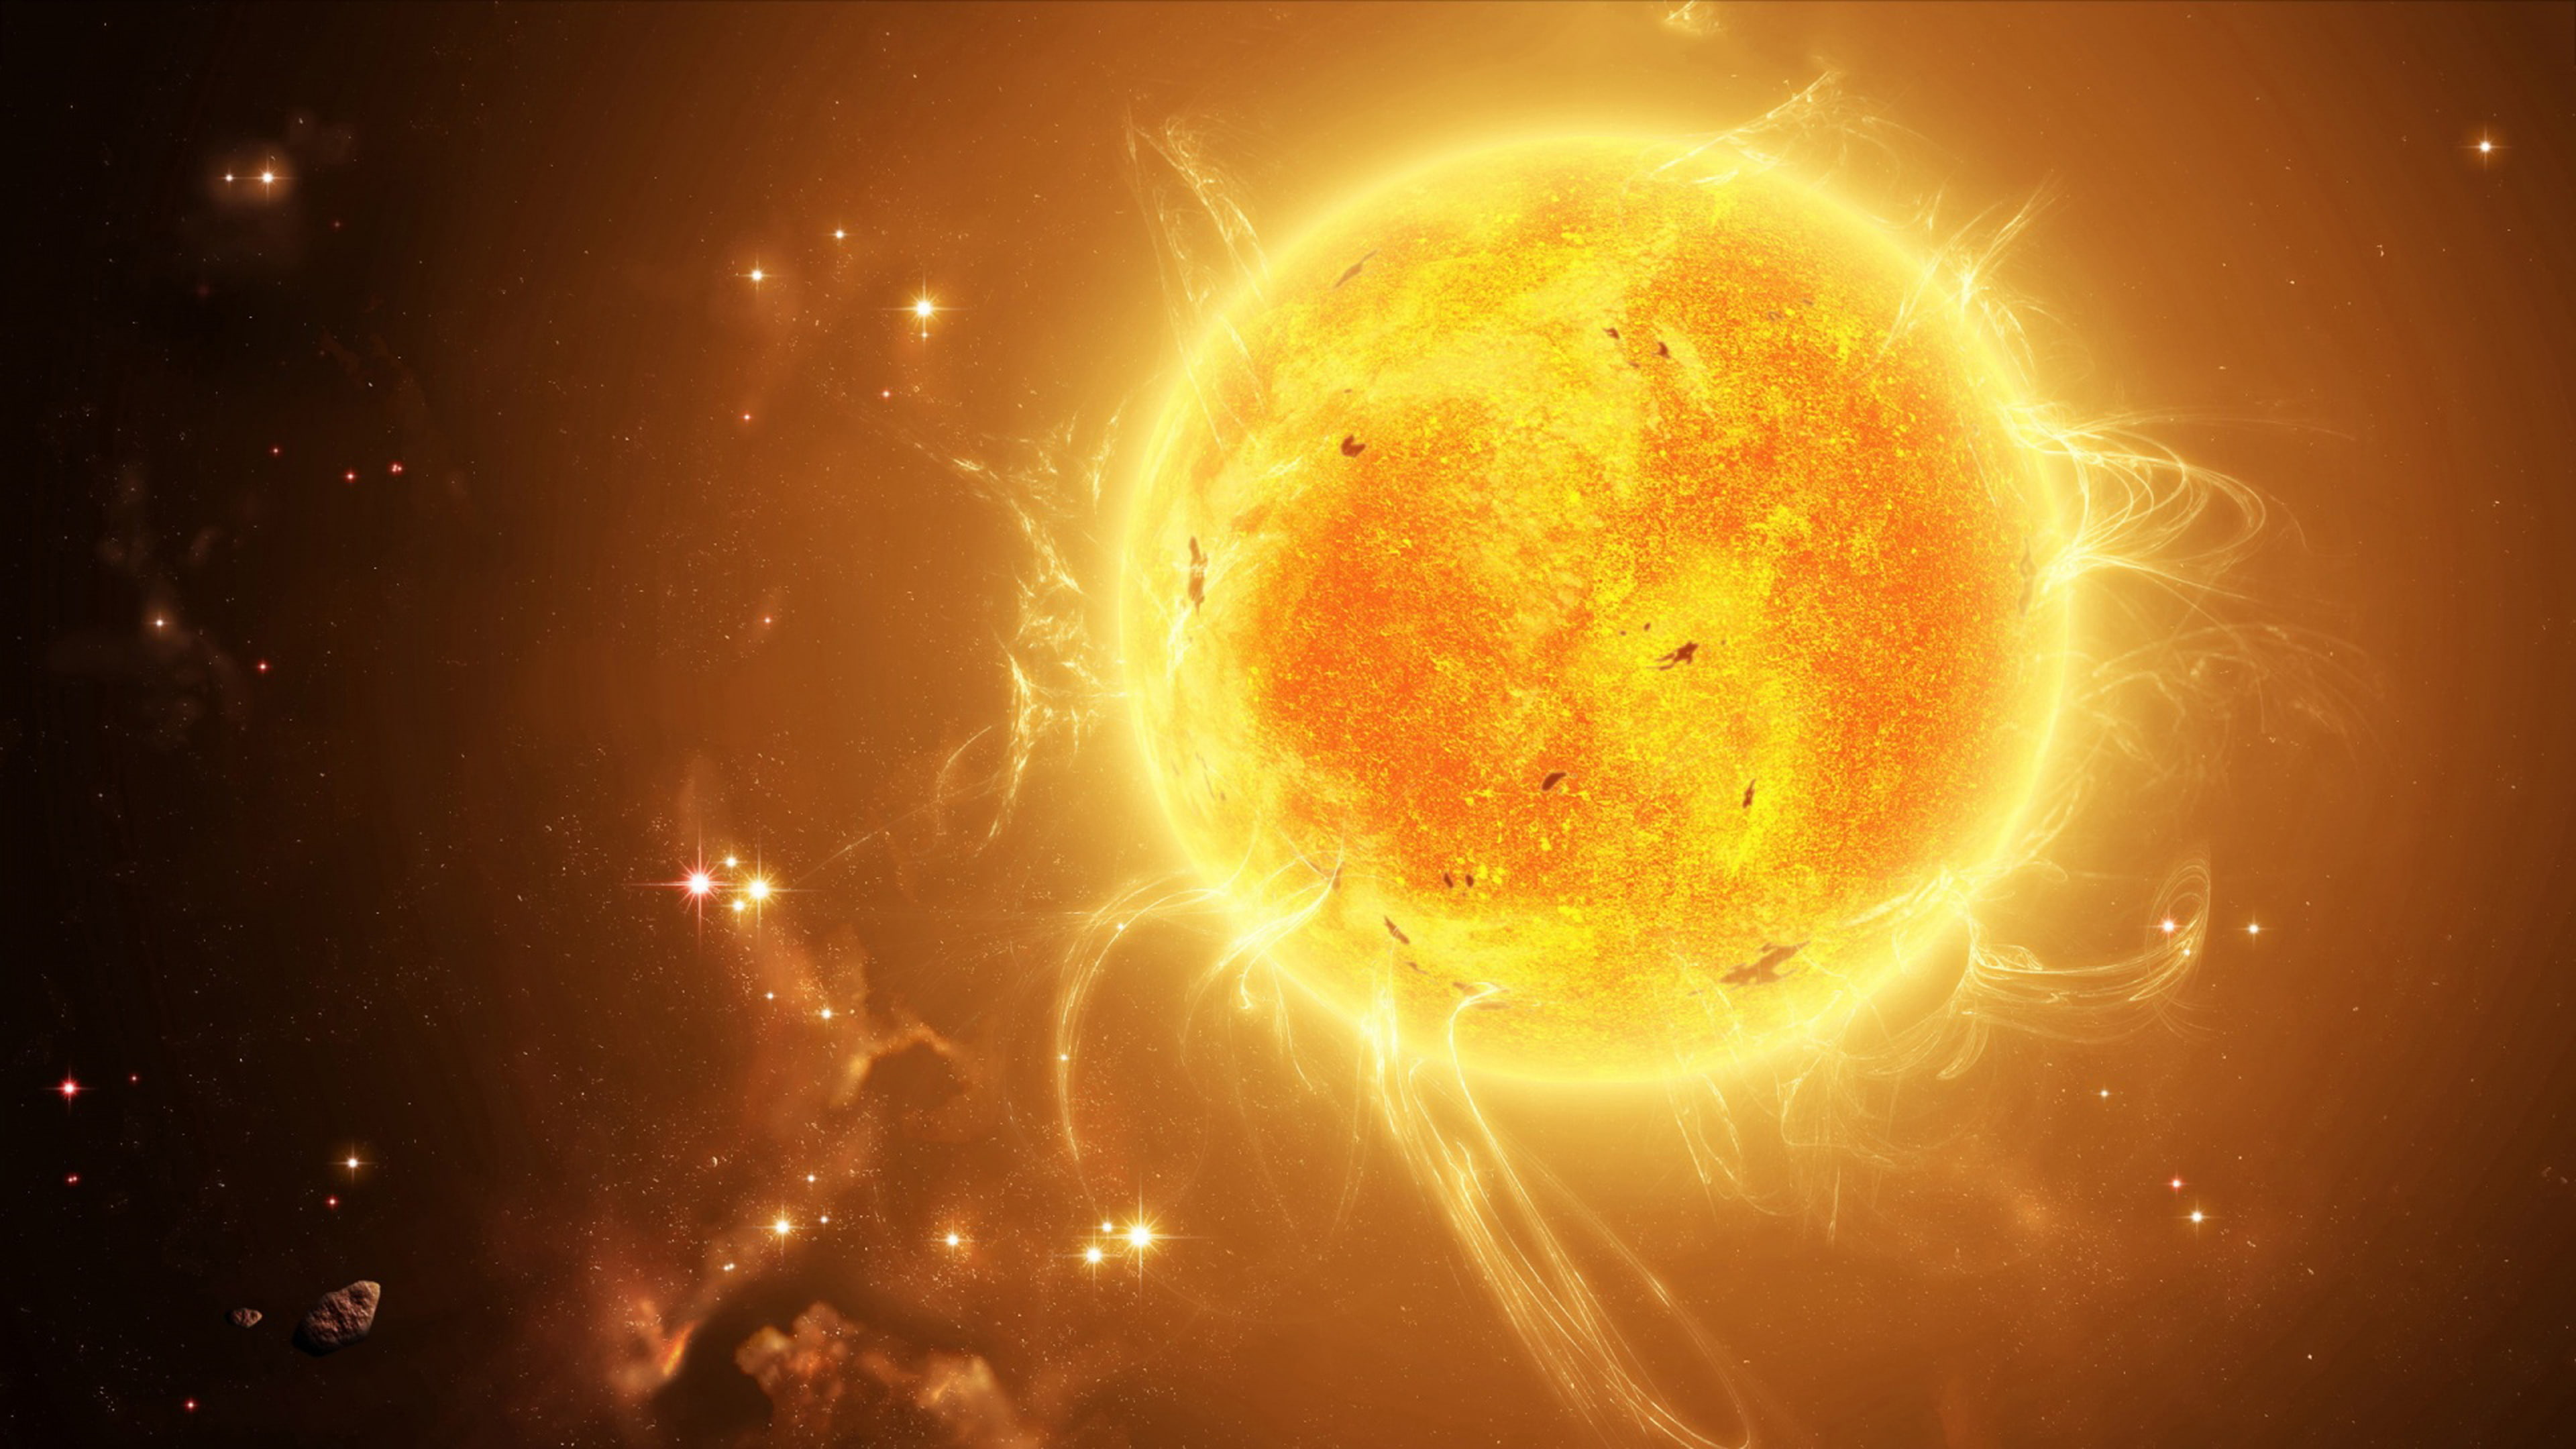 Sun star with a hot plasma in the center solar system Surface temperature 5.778 K Download Mobile Phone Wallpaper & Backgrounds 3840×2160